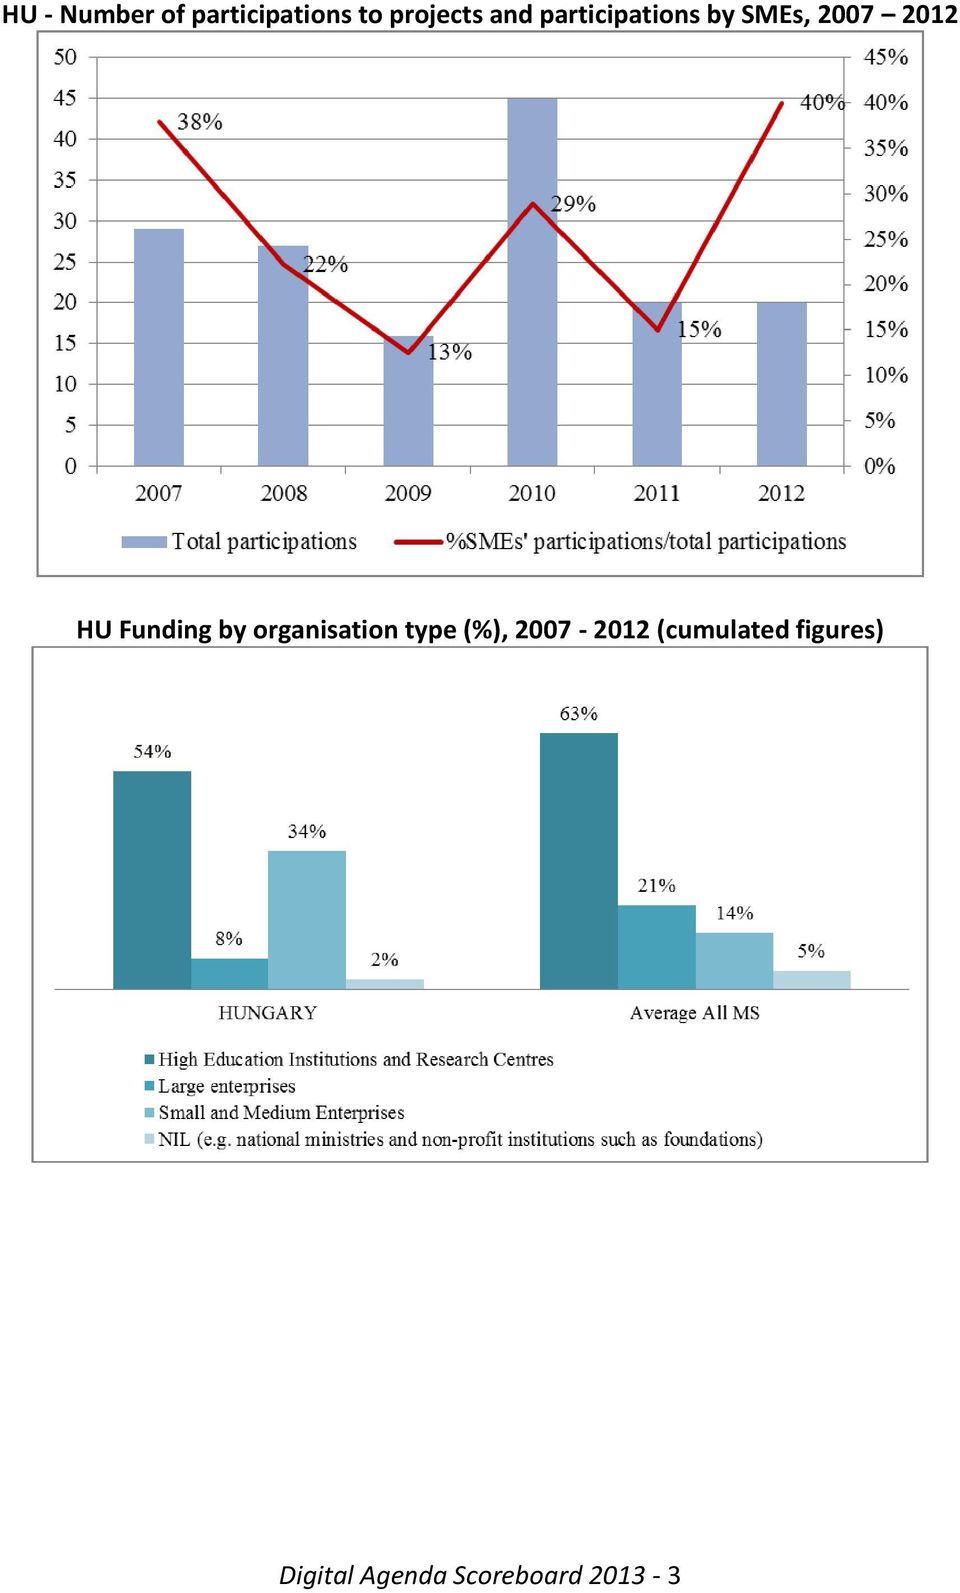 Funding by organisation type (%), 2007-2012